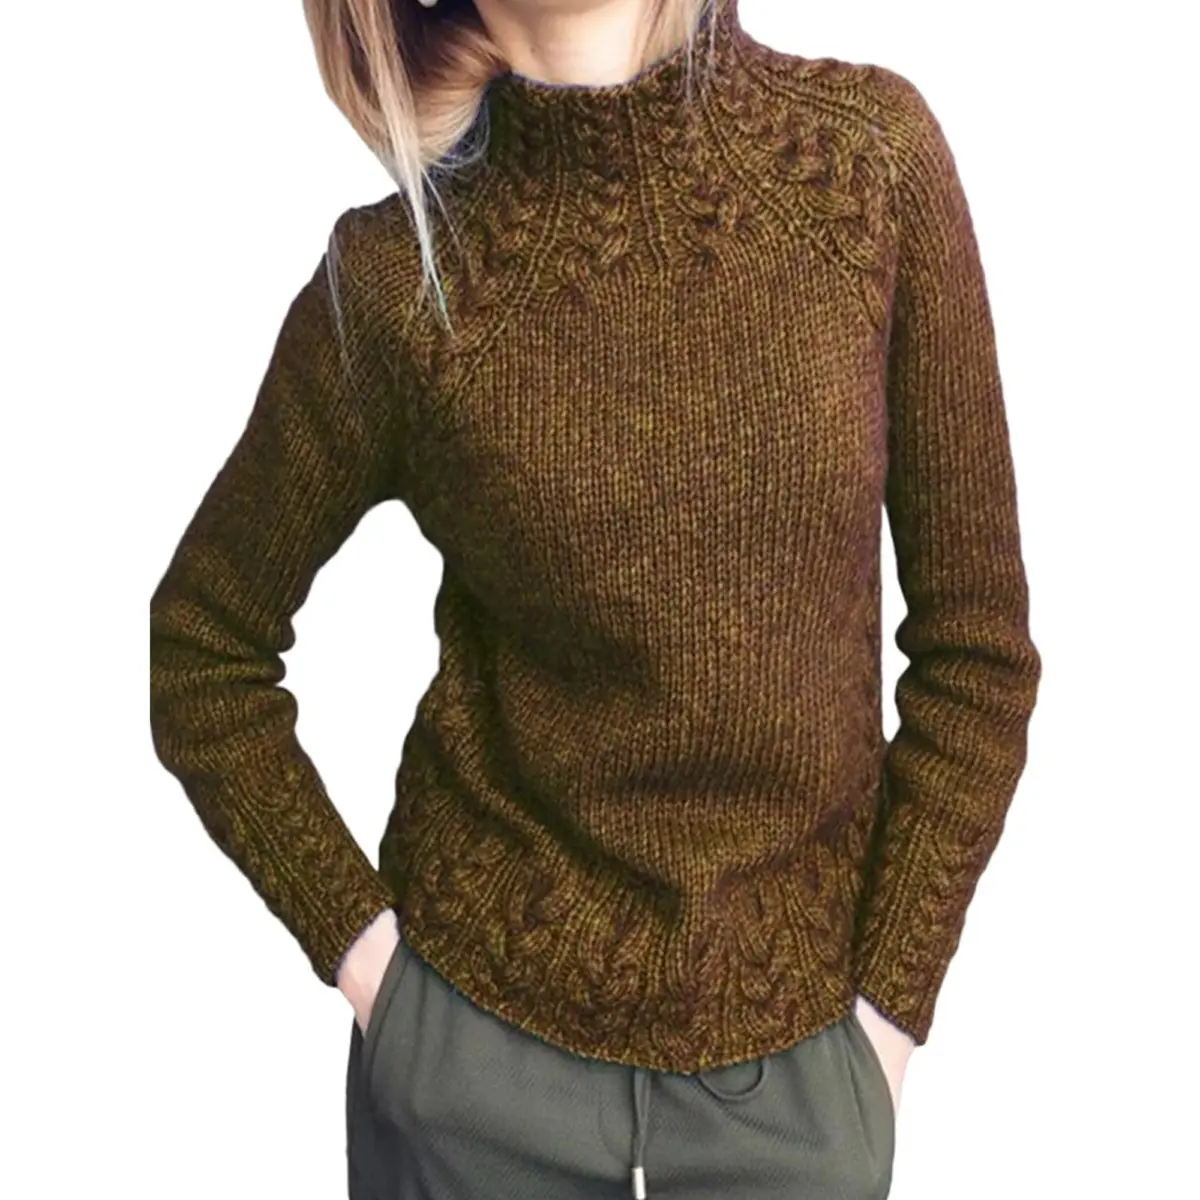 Winter Warm Jumper Tops for Women Casual Knitted Sweaters Khaki